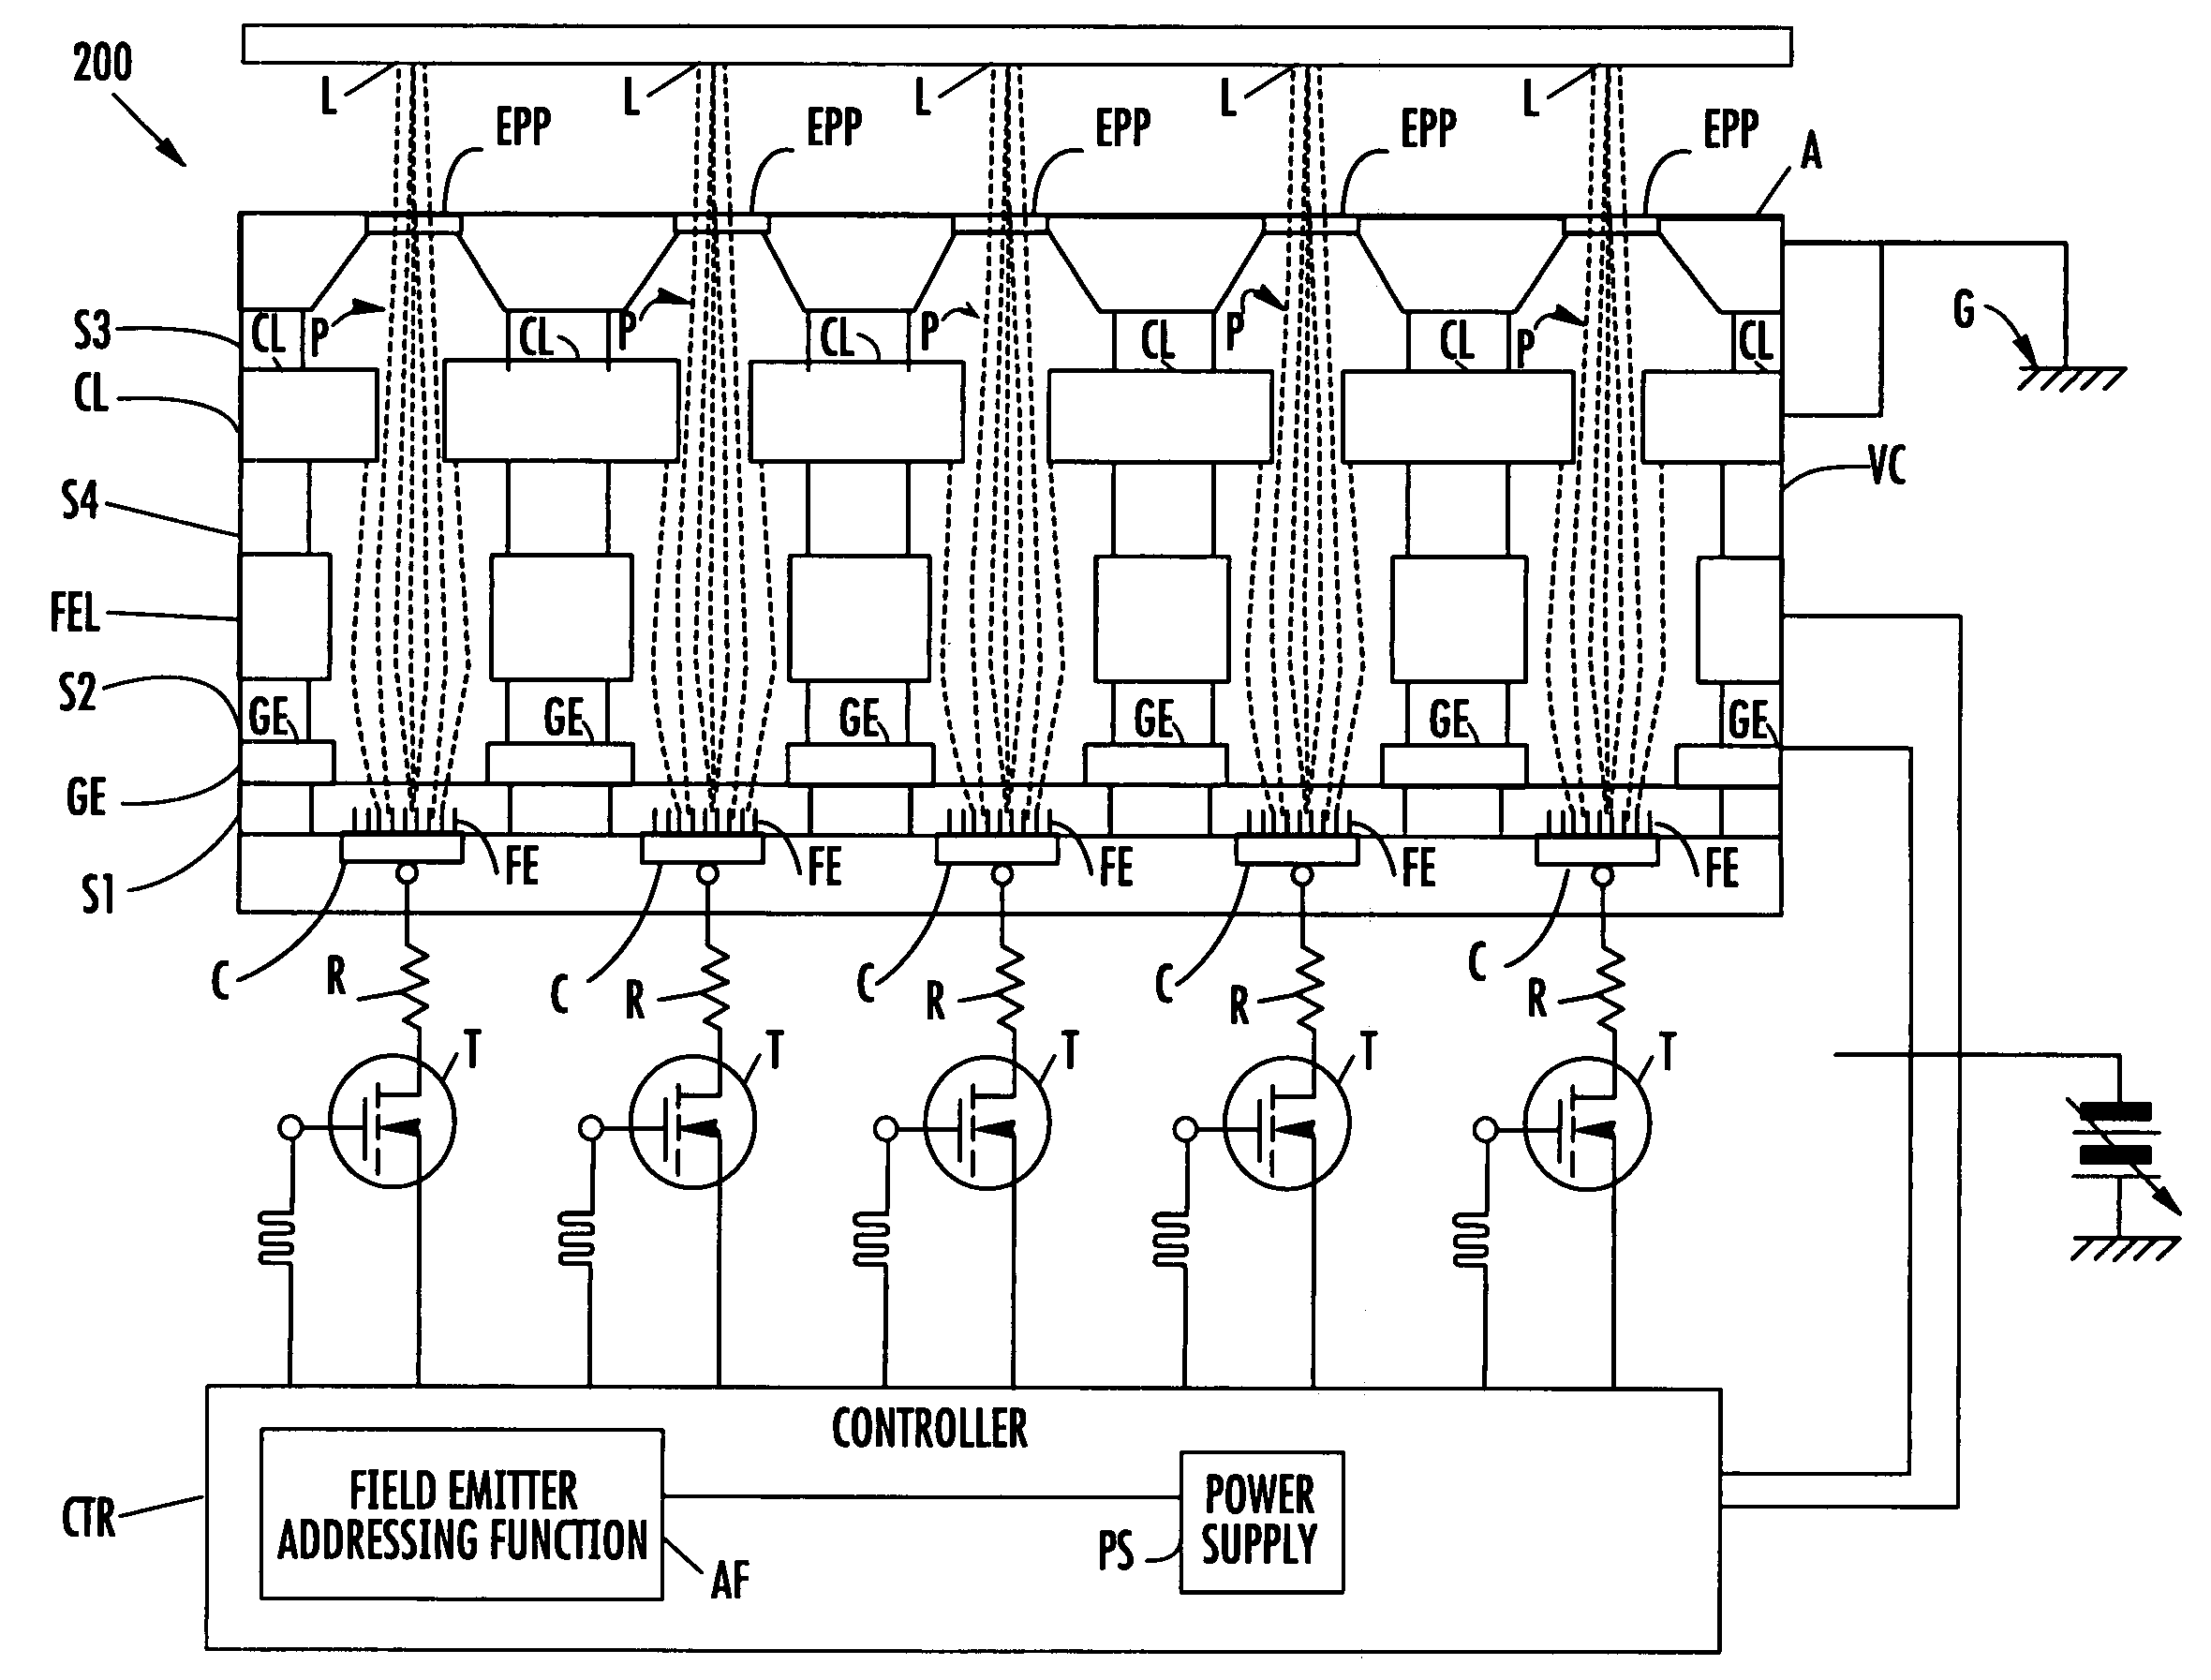 Multi-pixel electron microbeam irradiator systems and methods for selectively irradiating predetermined locations